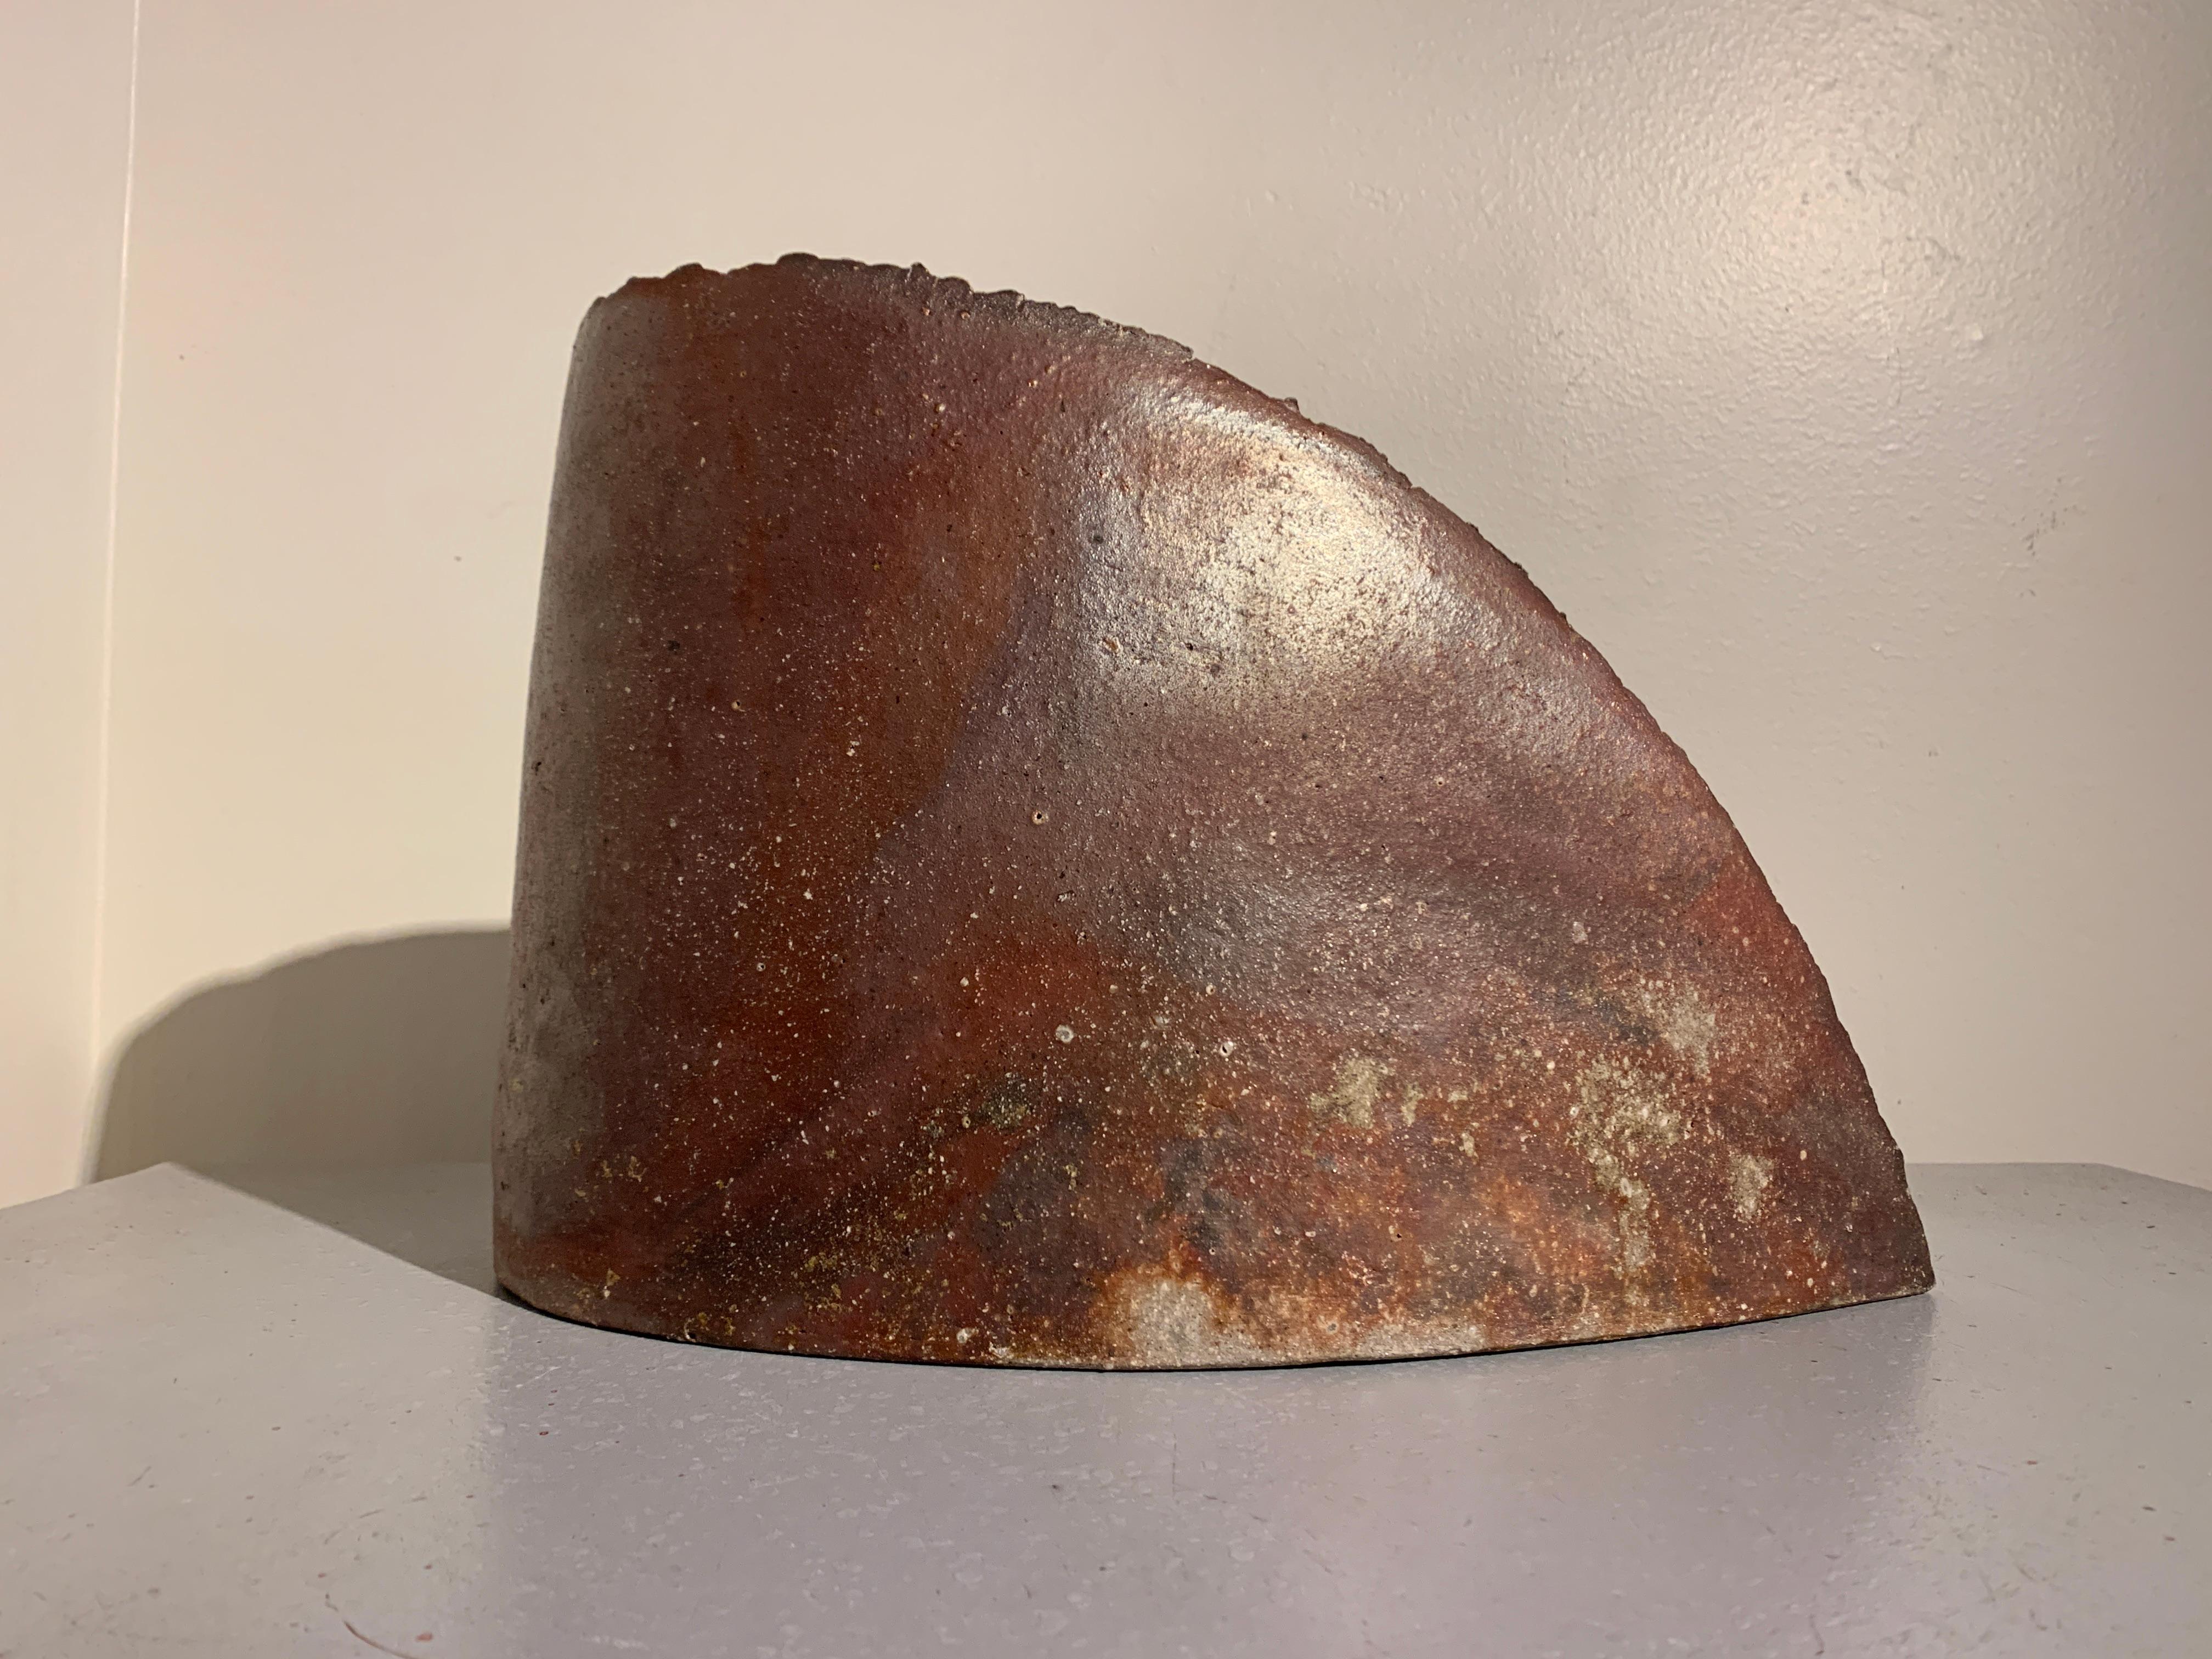 A stunning and dramatic contemporary tamba ware vessel with ash glaze by Kyoharu Ichino (b. 1957), circa 2007.

A beautiful study in form and balance, this vessel is highly reminiscent of Richard Serra's large-scale landscape works. There is a